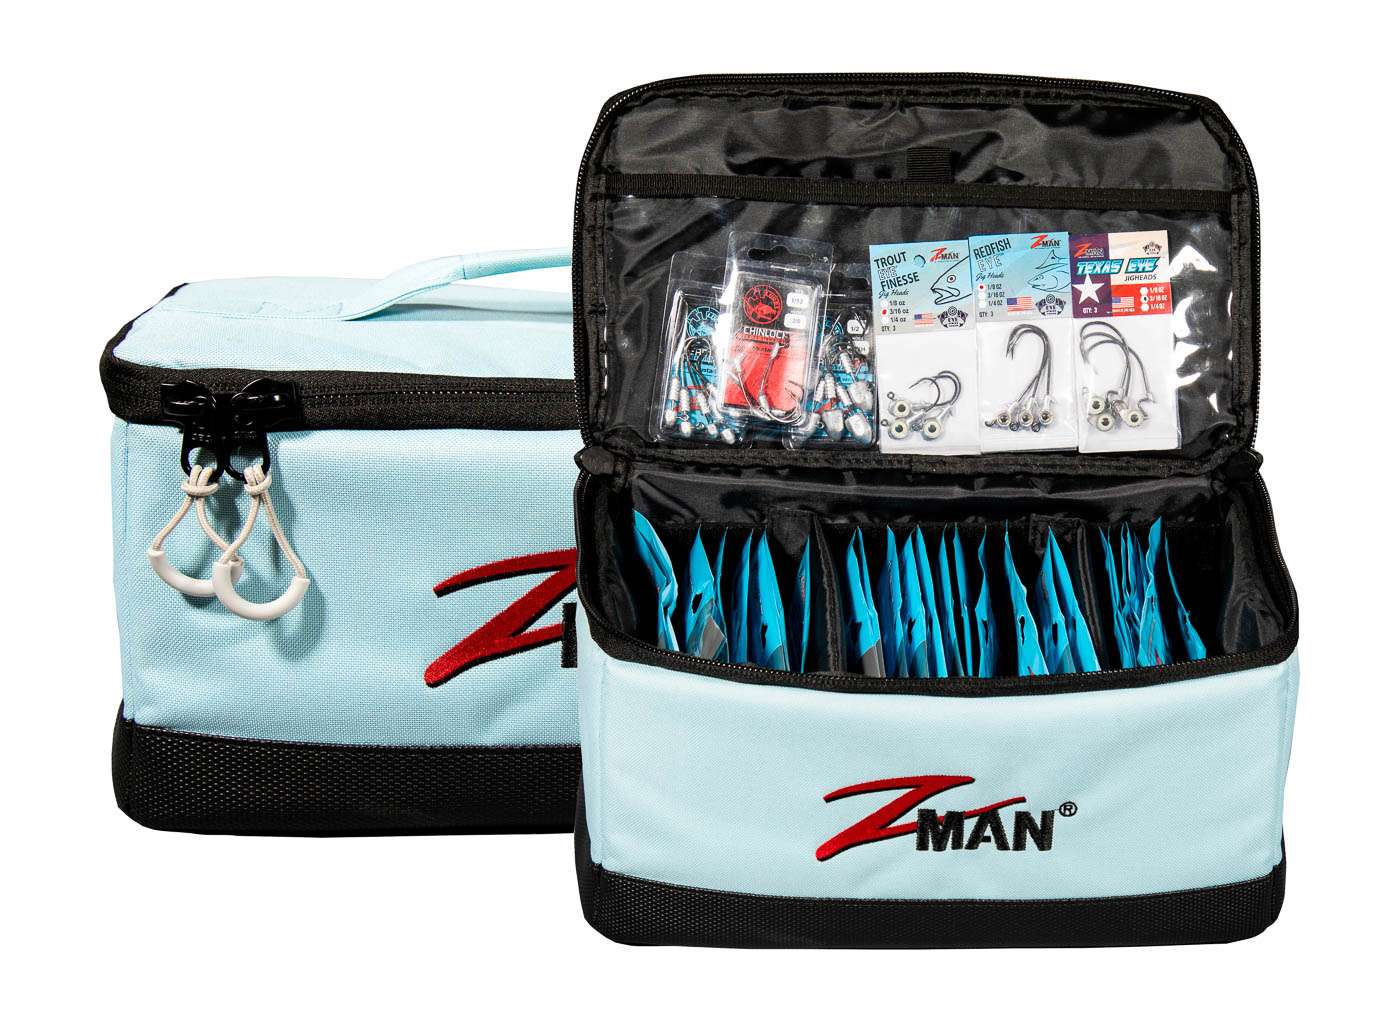 <p><strong>Z-Man Bait BlockZ</strong></p><p>Sized to hold up to 35 packs of ElaZtech soft plastics, Z-Manâs Bait BlockZ gives anglers a convenient, compact bait bag with adjustable dividers to customize it based on needs. A zippered lid and top handle provide easy transport. Constructed from rugged 600 denier waterproof fabric, the Bait BlockZ offers additional durability and waterproofing with a tough rubberized bottom that prevents deck slippage. An interior clear storage pocket and exterior mesh pocket contain larger items like tools and leader spools. $49.99. <a href=